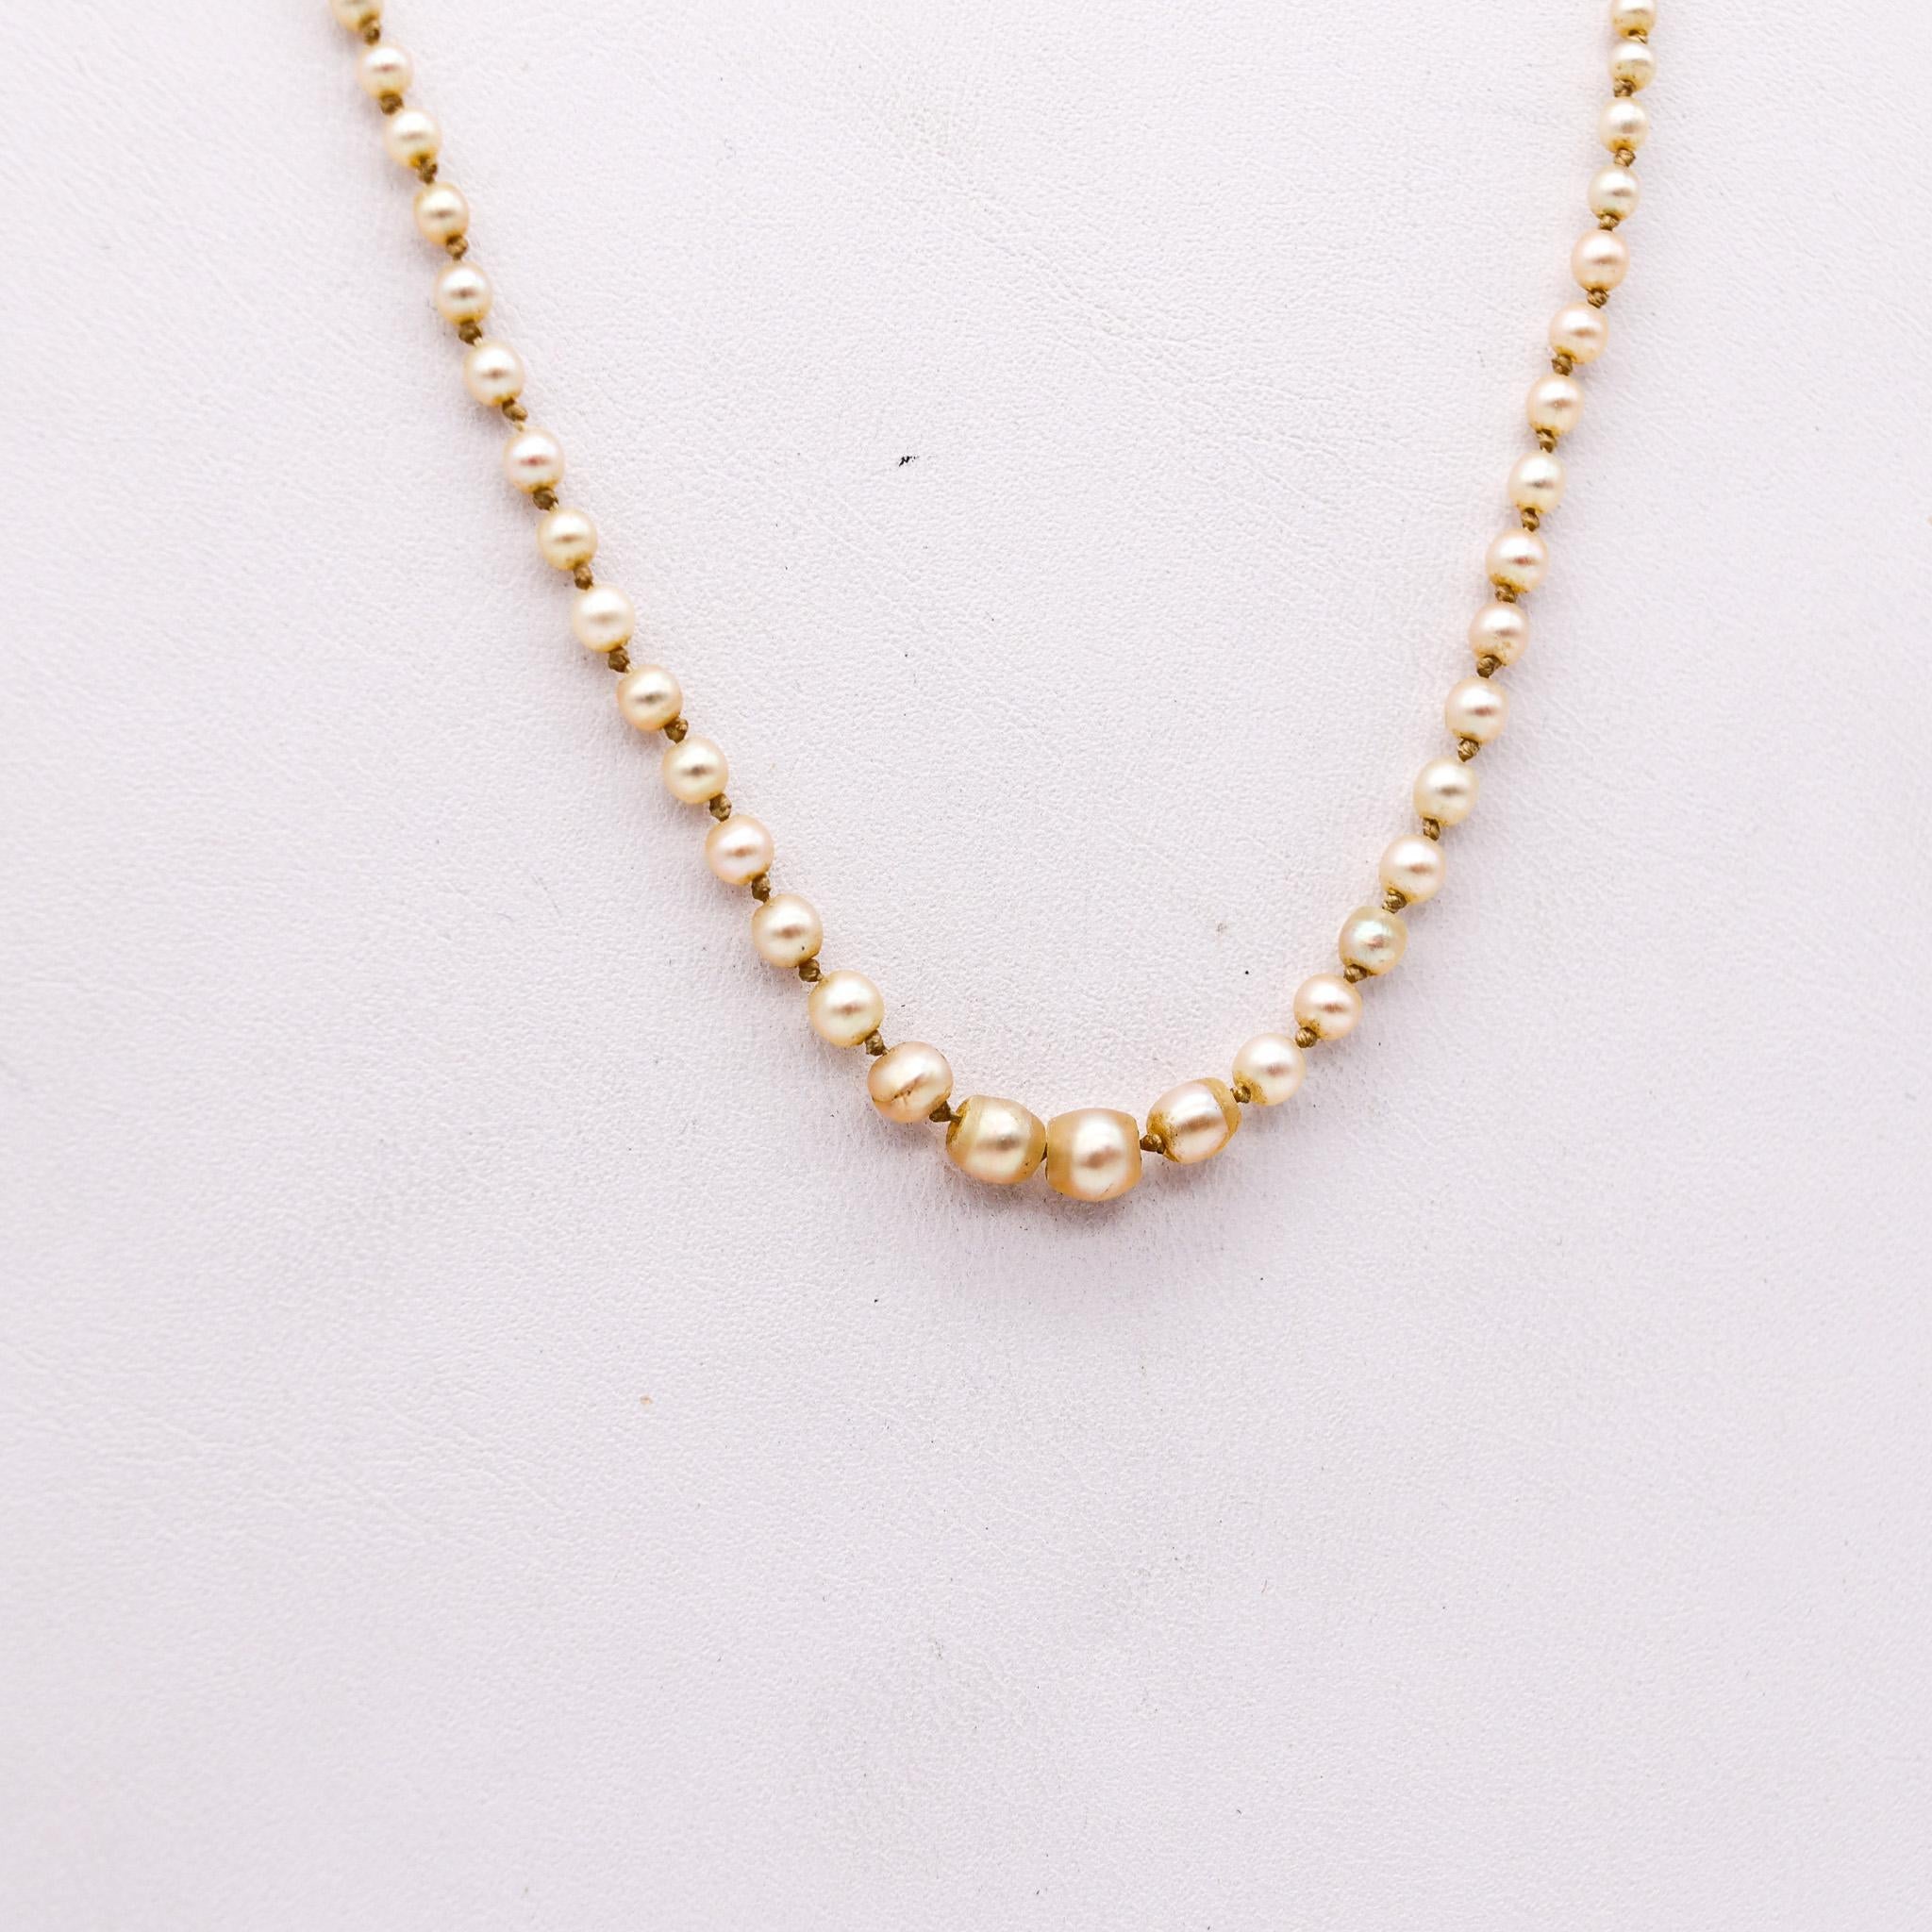 Edwardian belle époque pearls necklace.

Extremely chic and very delicate necklace, created in England during the Edwardian belle époque period, back in the 1910. This necklace is made up by a knotted strand of one hundred forty two pearls and a